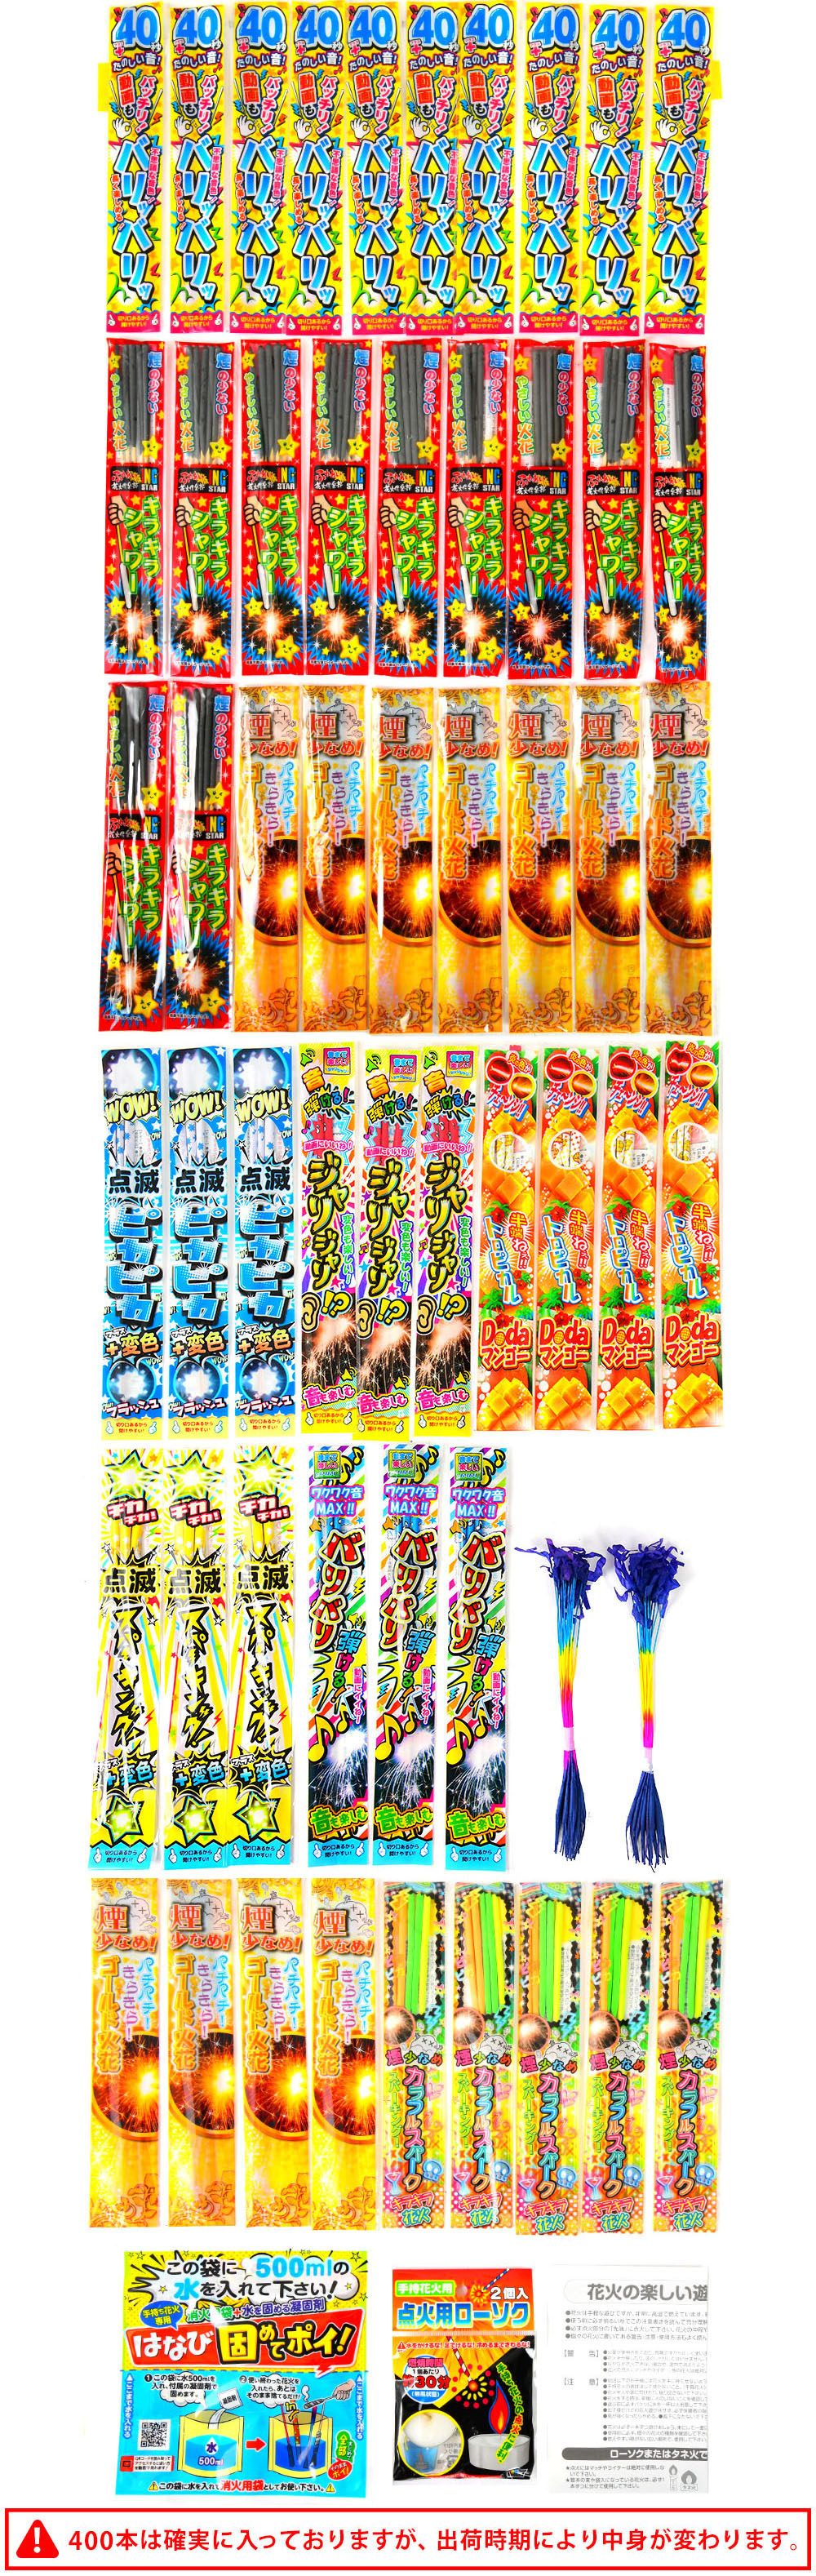  in stock flower fire 400ps.@ and more assortment set flower fire lucky bag in stock flower fire set flower fire set [omkhkr-320504-baraomk] free shipping Okinawa * remote island shipping un- possible 